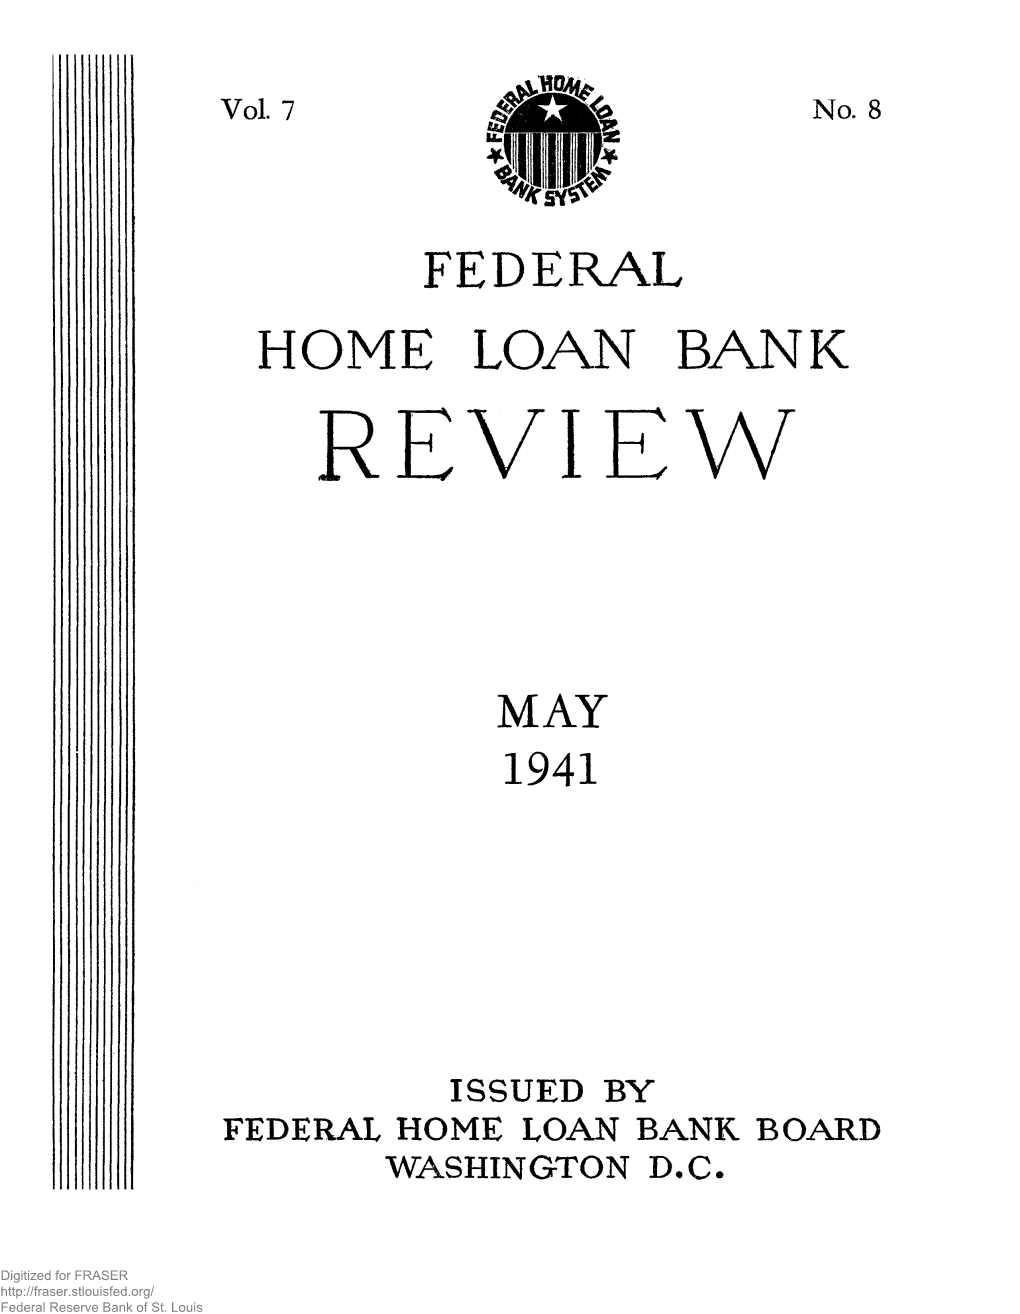 Federal Home Loan Bank Review